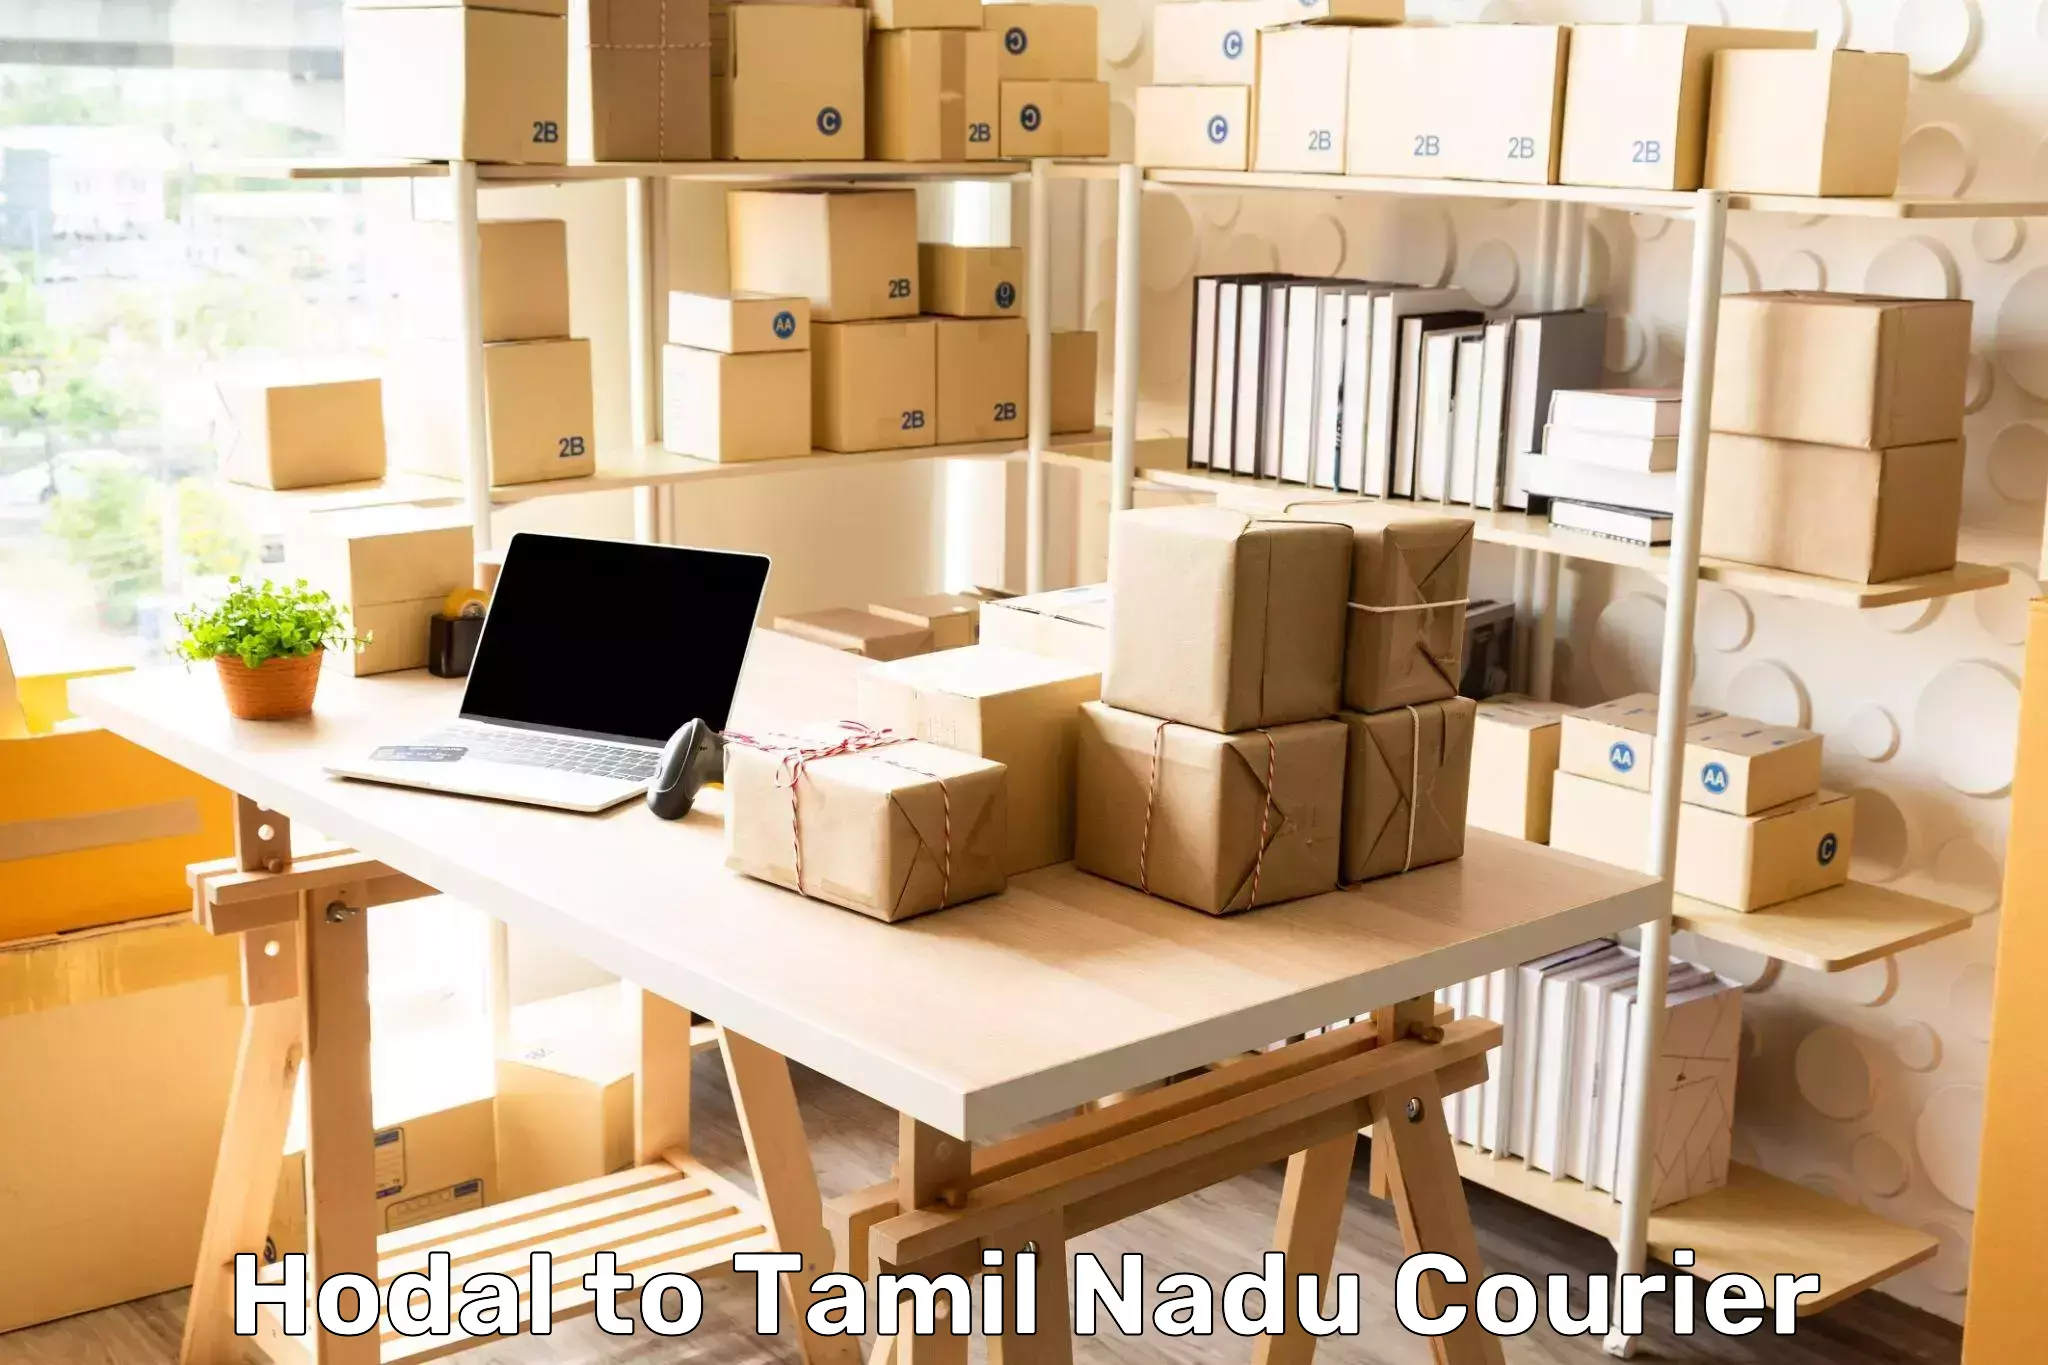 Global shipping networks Hodal to Tamil Nadu